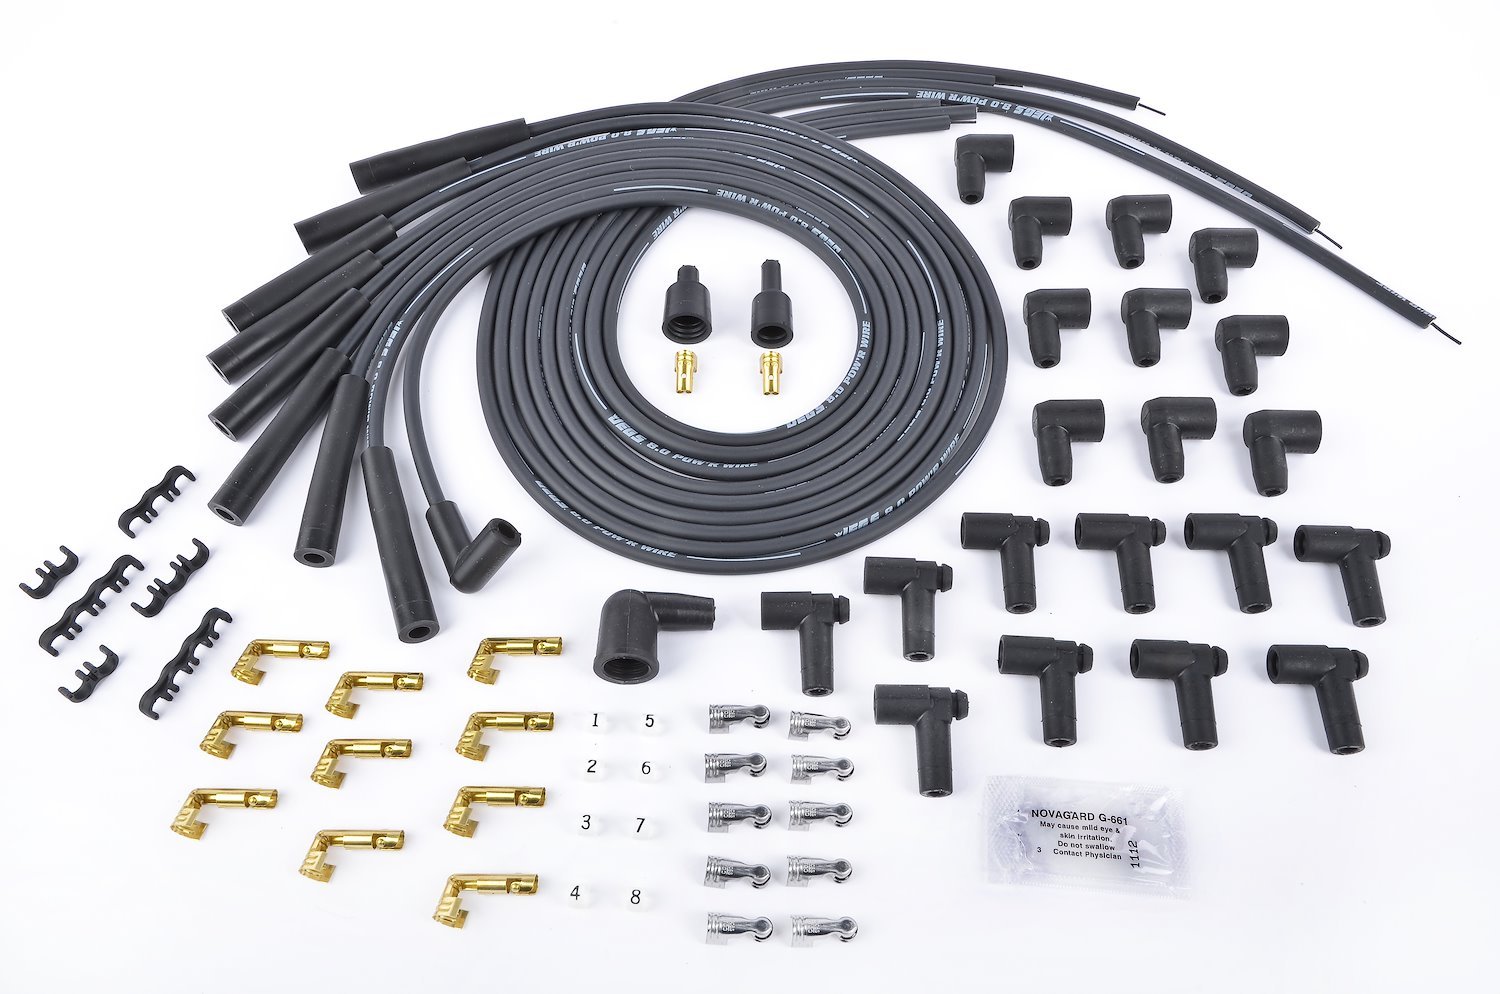 8.0mm Black Pow'r Wires Small & Big Block Chevy Over Valve Covers or Under Headers & AMC 290-401 V8 W/HEI